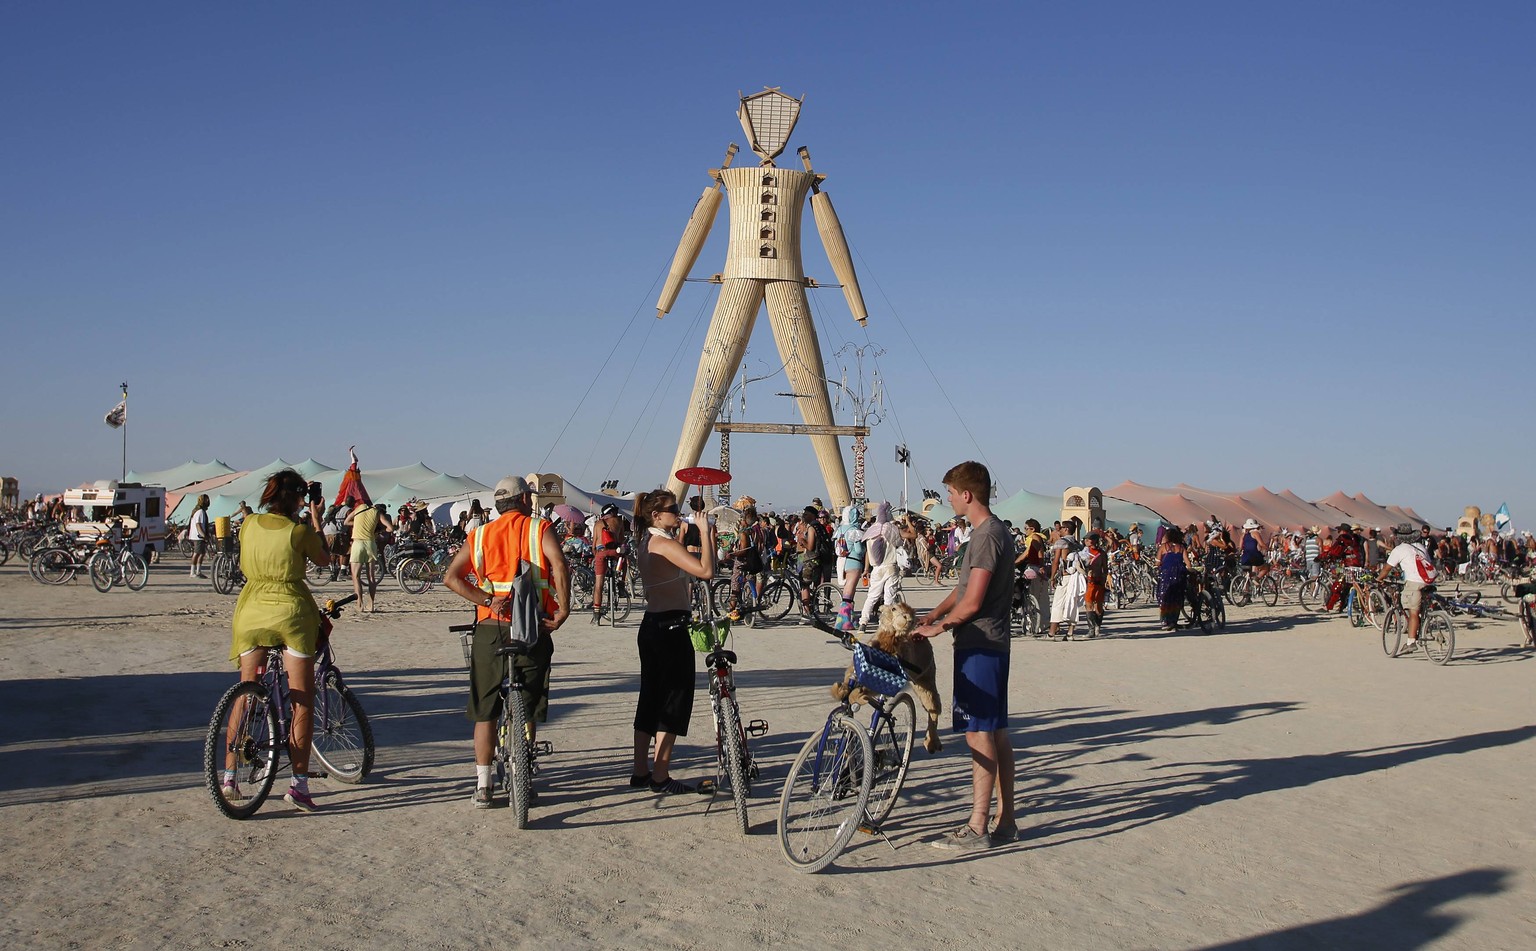 People gather at the man structure during the Burning Man 2014 &quot;Caravansary&quot; arts and music festival in the Black Rock Desert of Nevada, August 27, 2014. People from all over the world have  ...